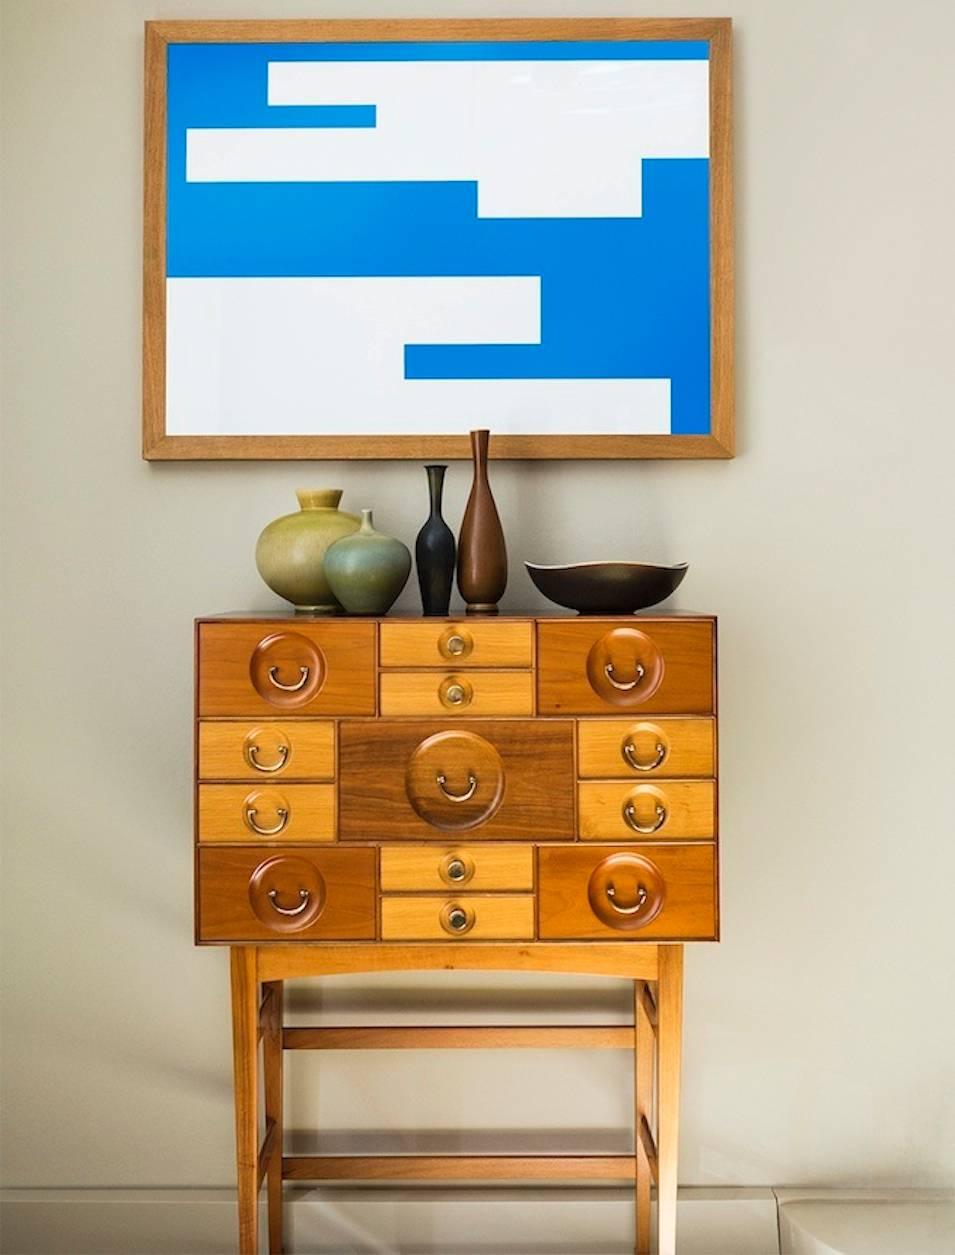 Model 2237, 13 different sized drawers of oak, walnut and mahogany. Sides and top veneered with amboyna root, legs of walnut, pull handles and knobs of brass. 
Frank designed many variations of the cabinet-on-stand form inspired by English and